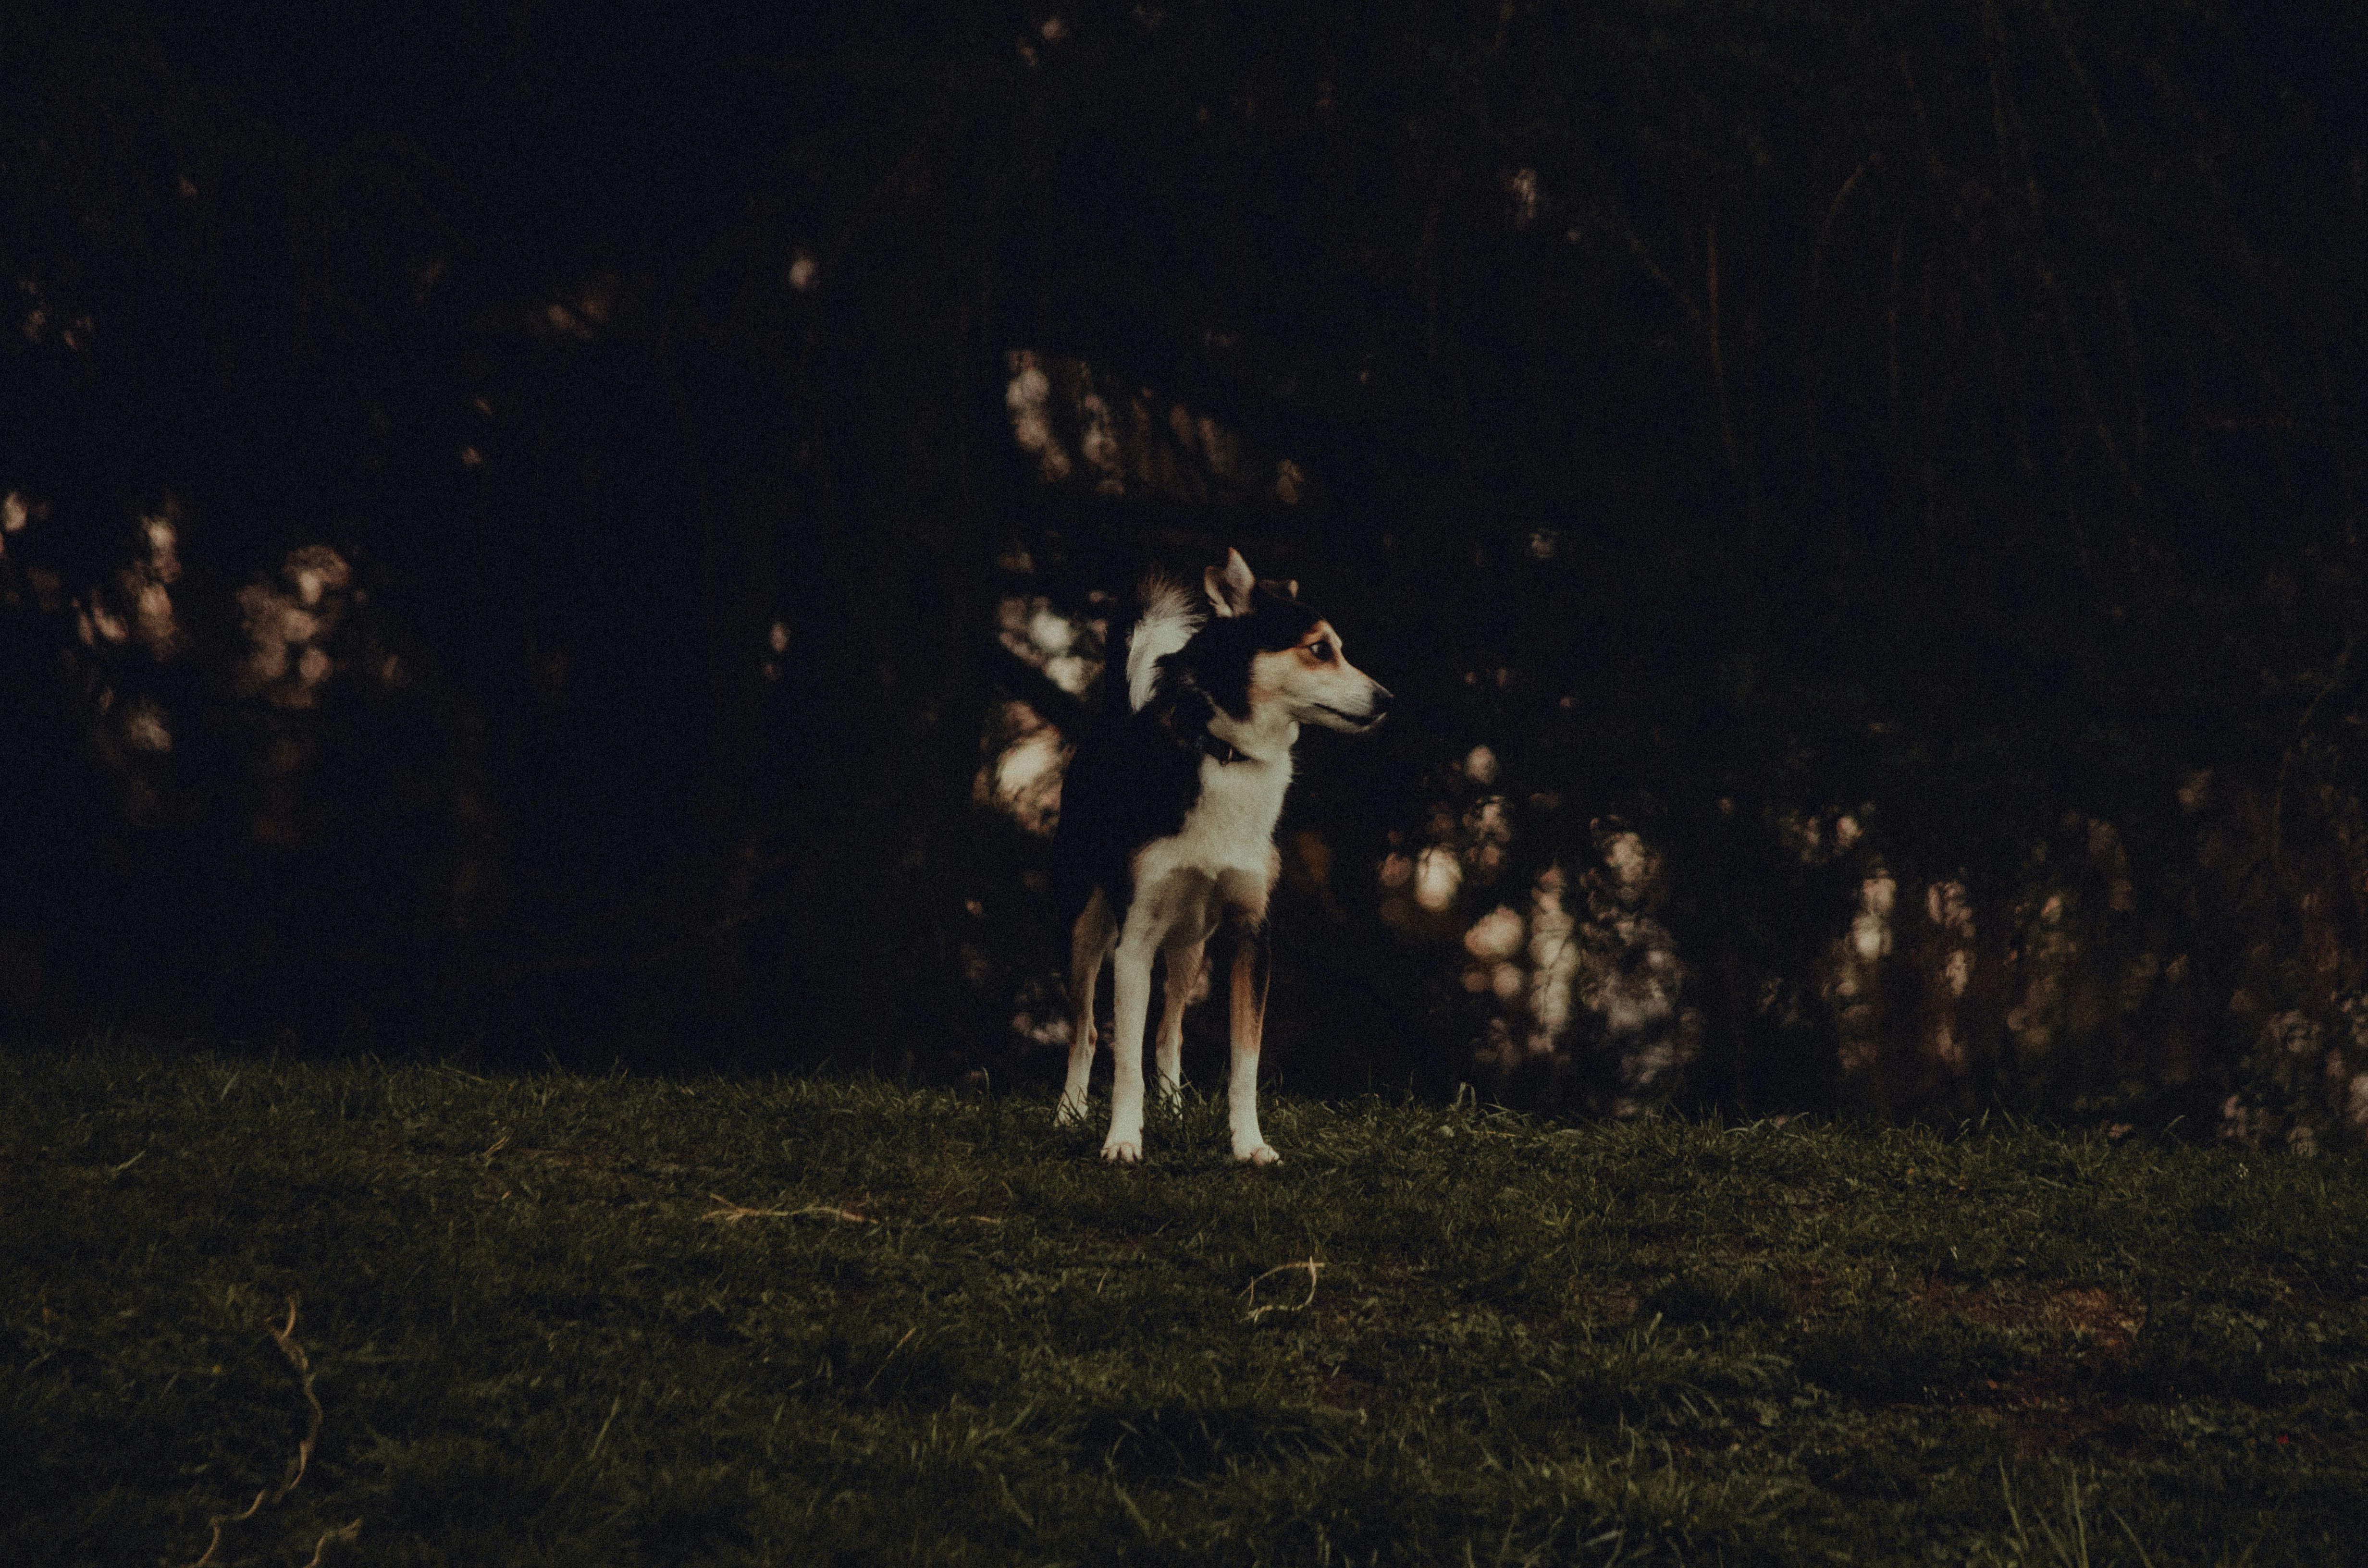 white and black short coat dog standing on grass field during night time